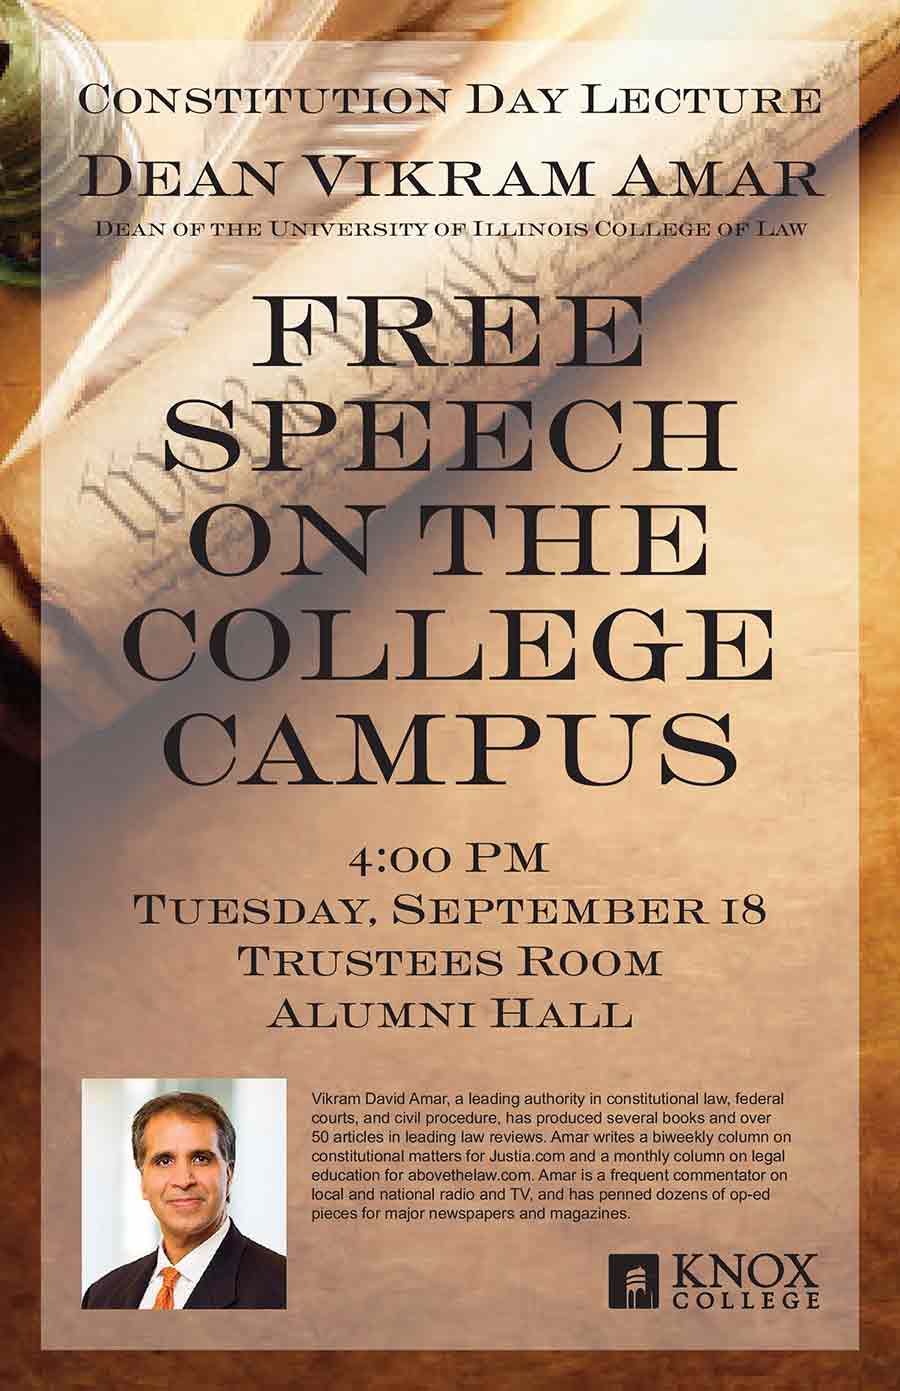 Free Speech on the College Campus